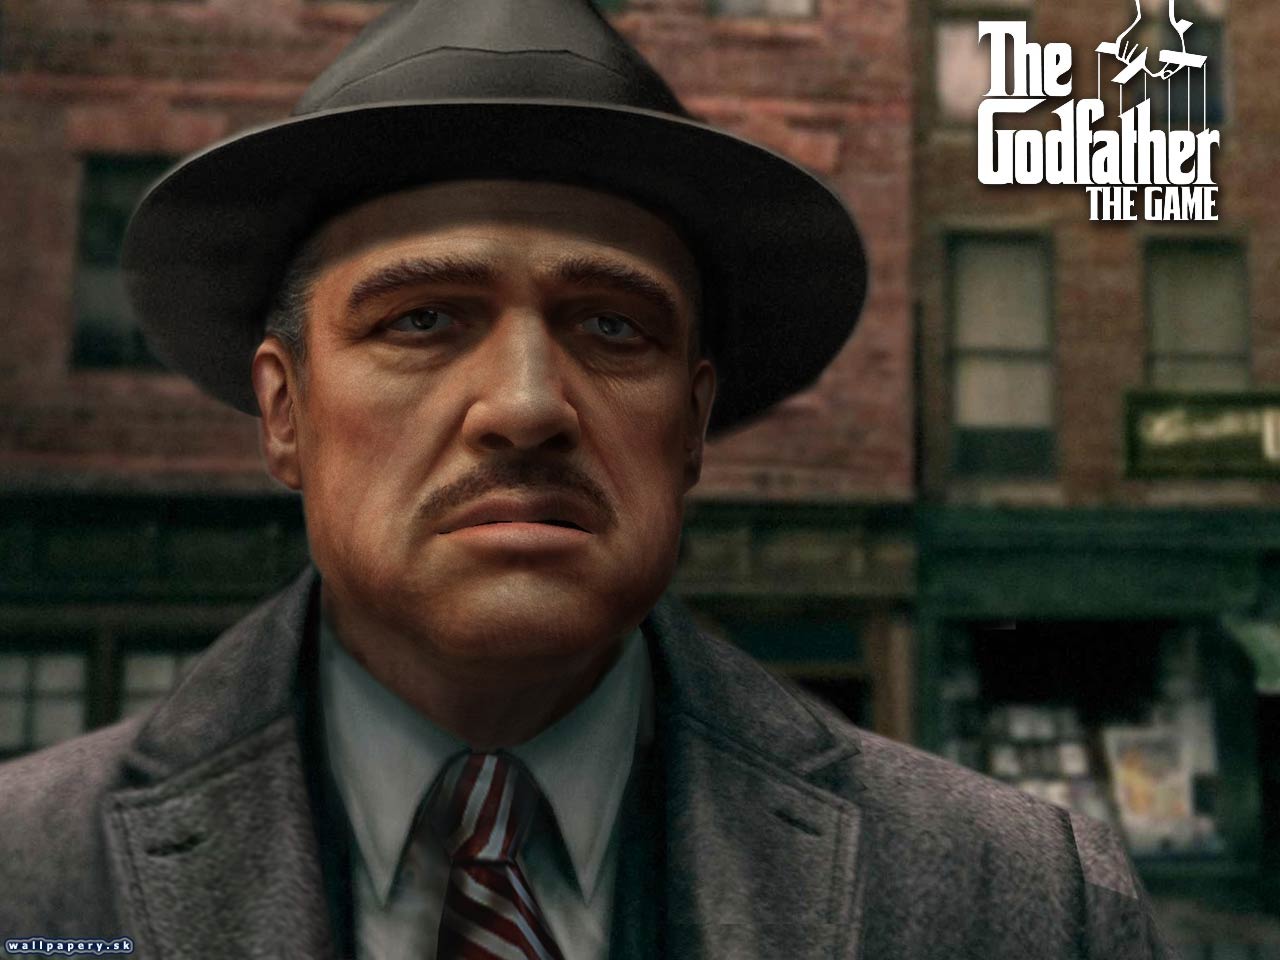 The Godfather - wallpaper 5